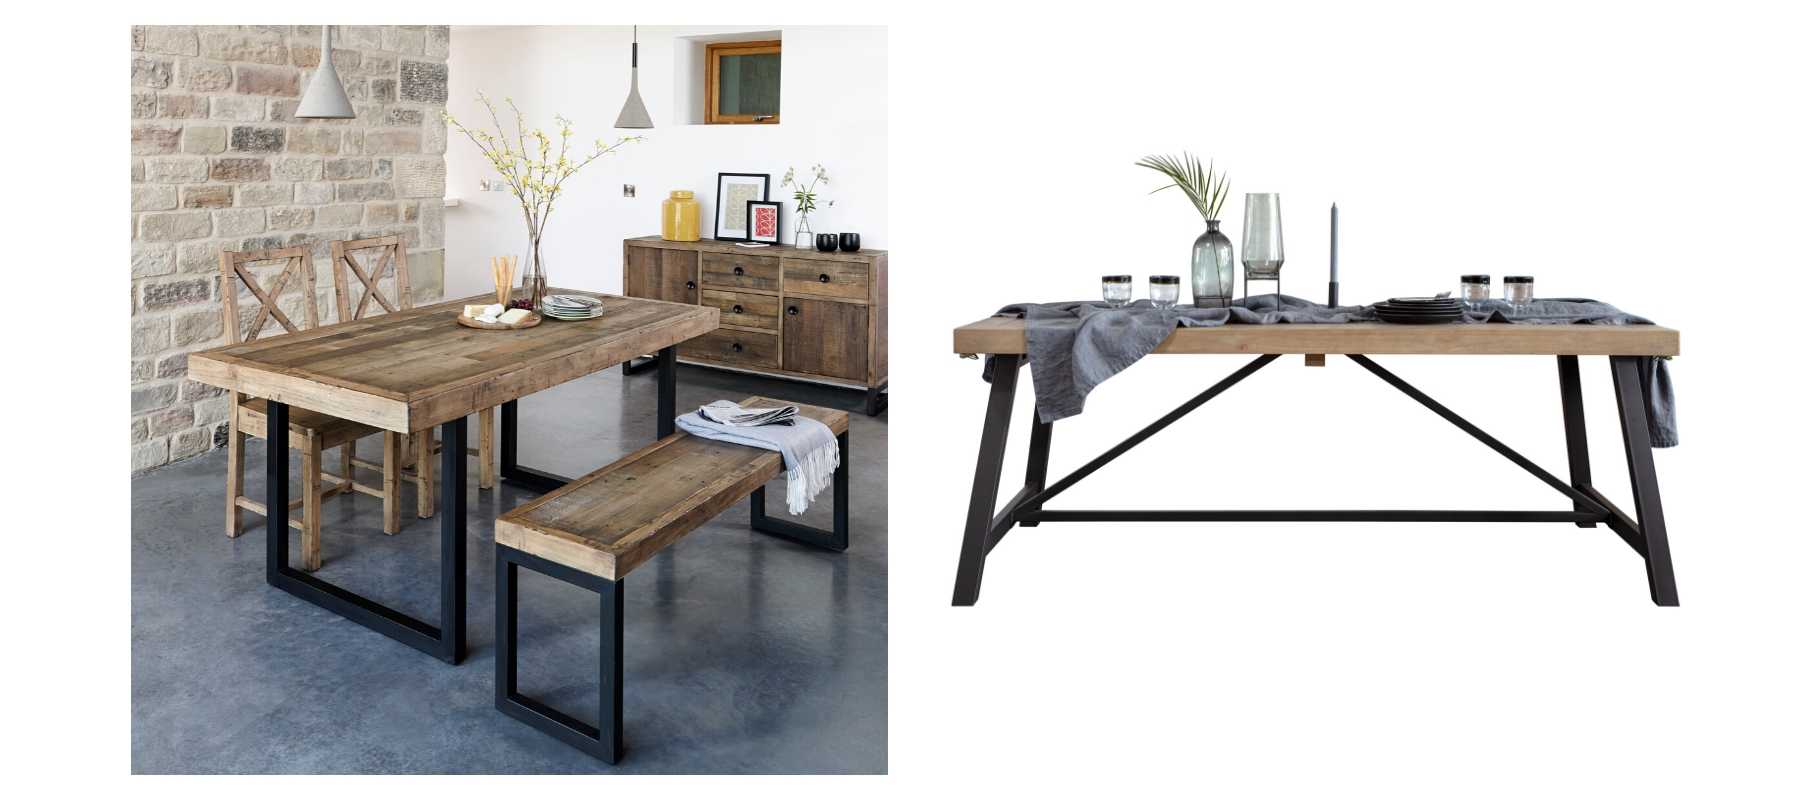 Standford Reclaimed Wood Table and Lansdowne Industrial Rustic Dining Table